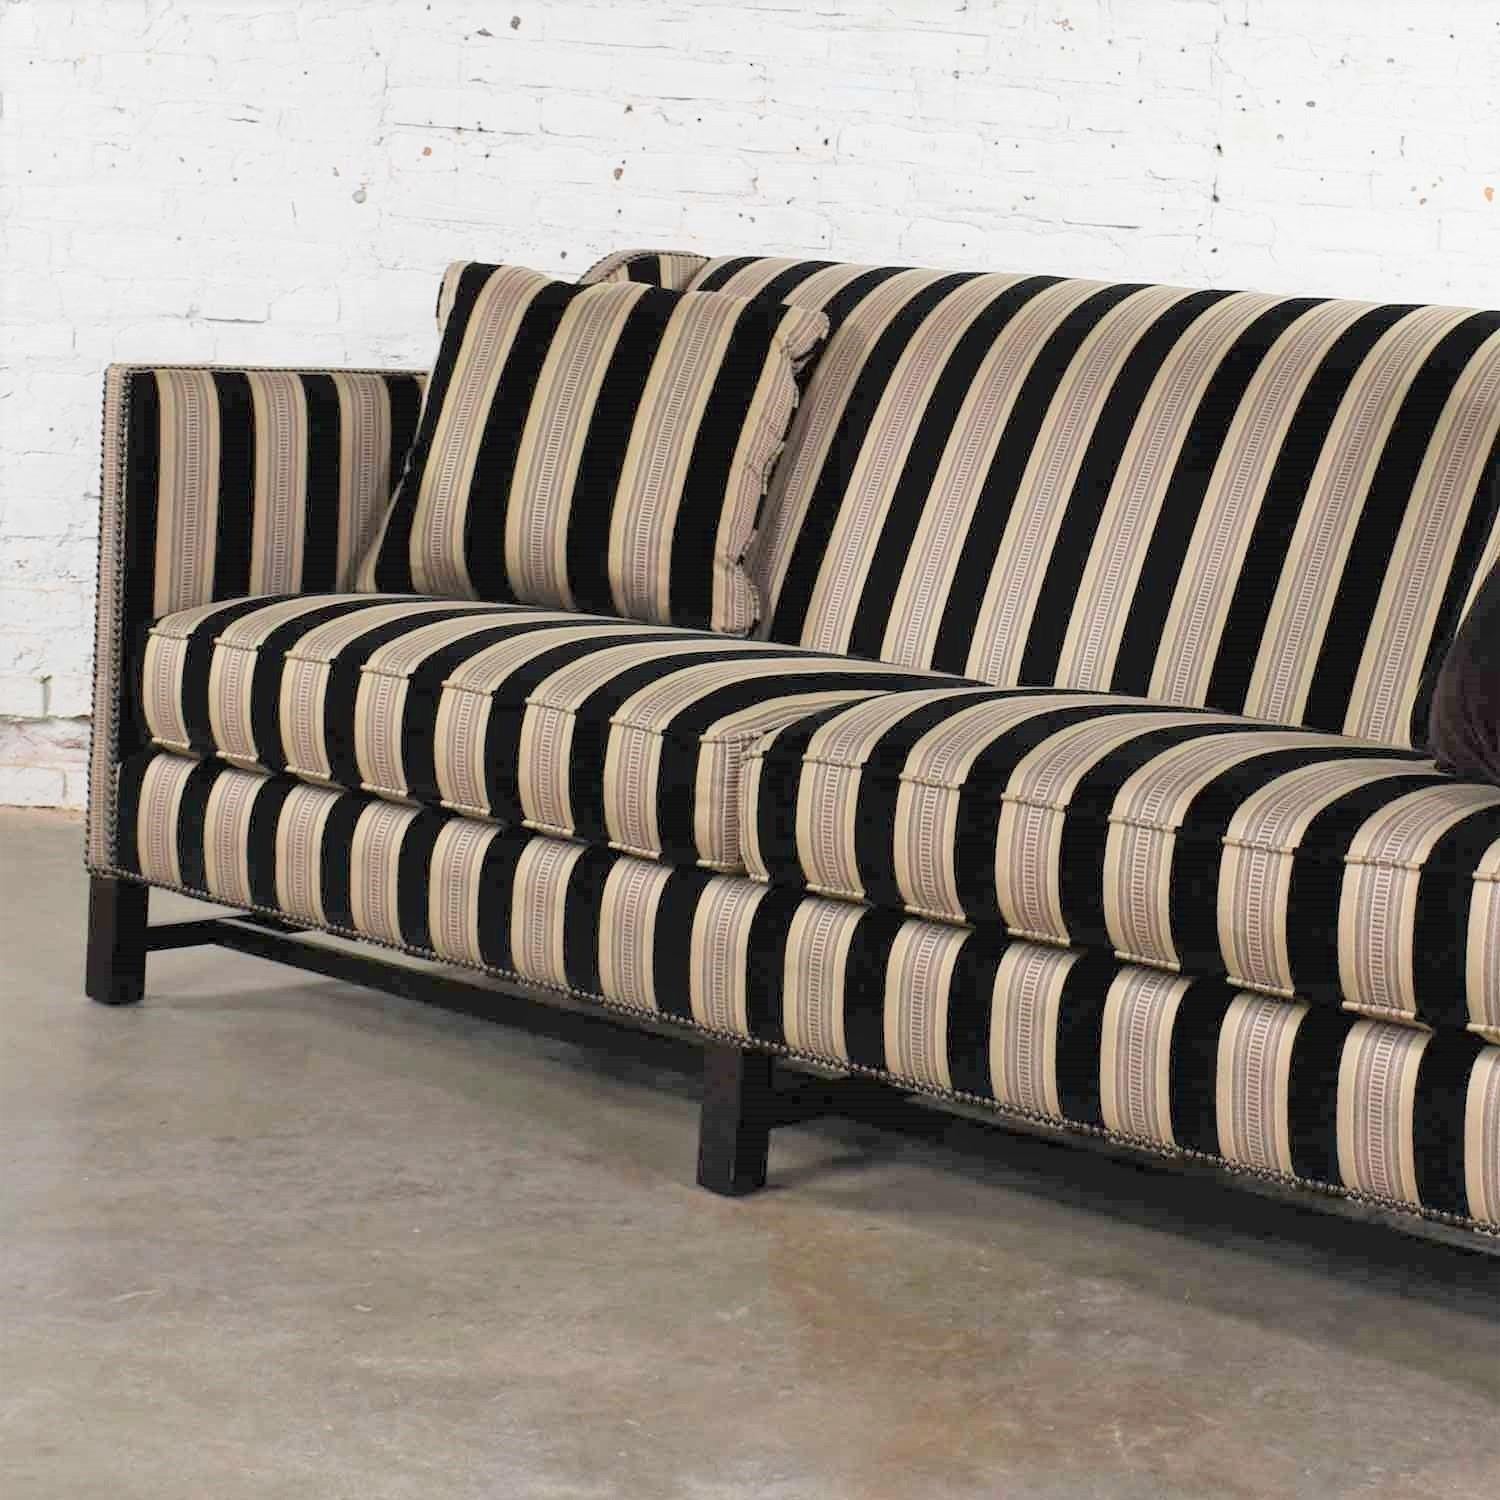 Handsome Bernhardt Interiors tuxedo style sofa with sloped arms in a fabulous black and taupe stripe fabric with nailhead detail and on a black trestle base. It is in incredible ready to use condition. There are some signs of use on the legs but